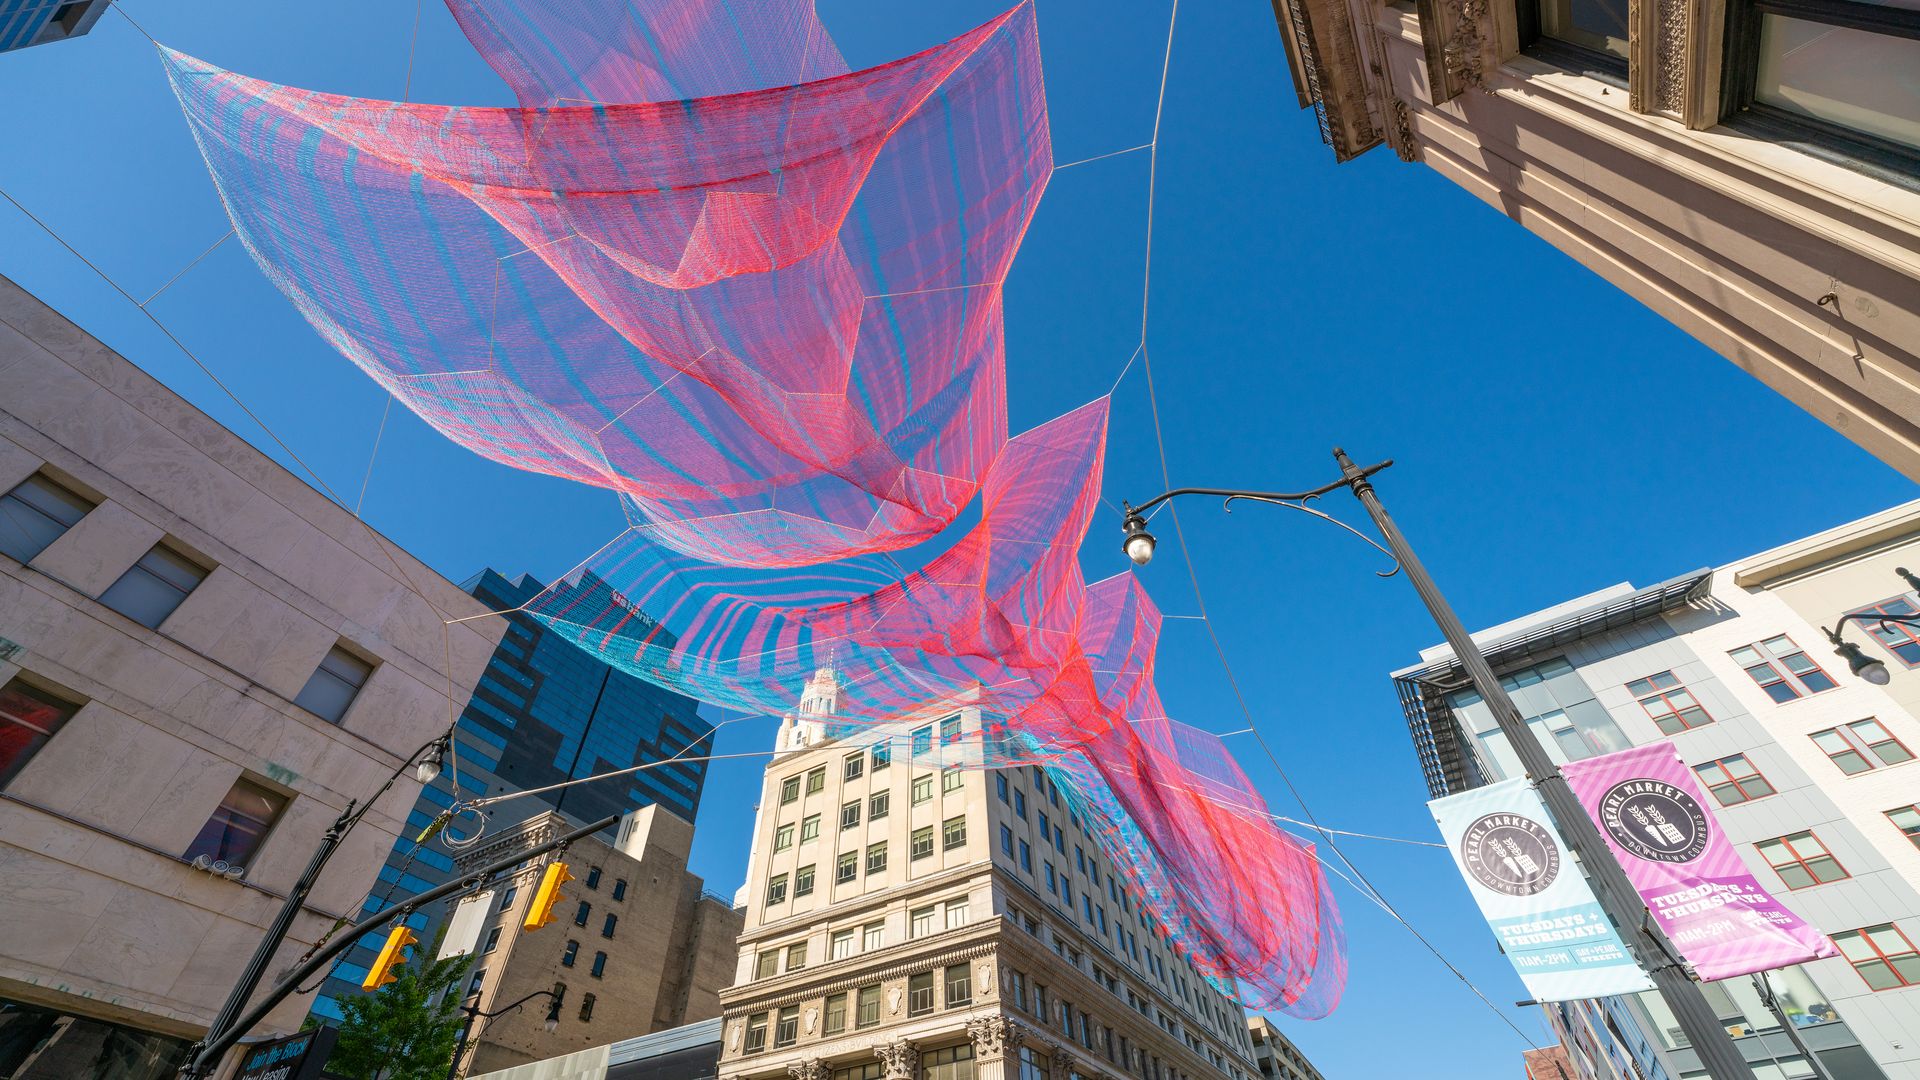 The red and blue "Current" sculpture, made of twine, hangs across the intersection of High and Gay streets